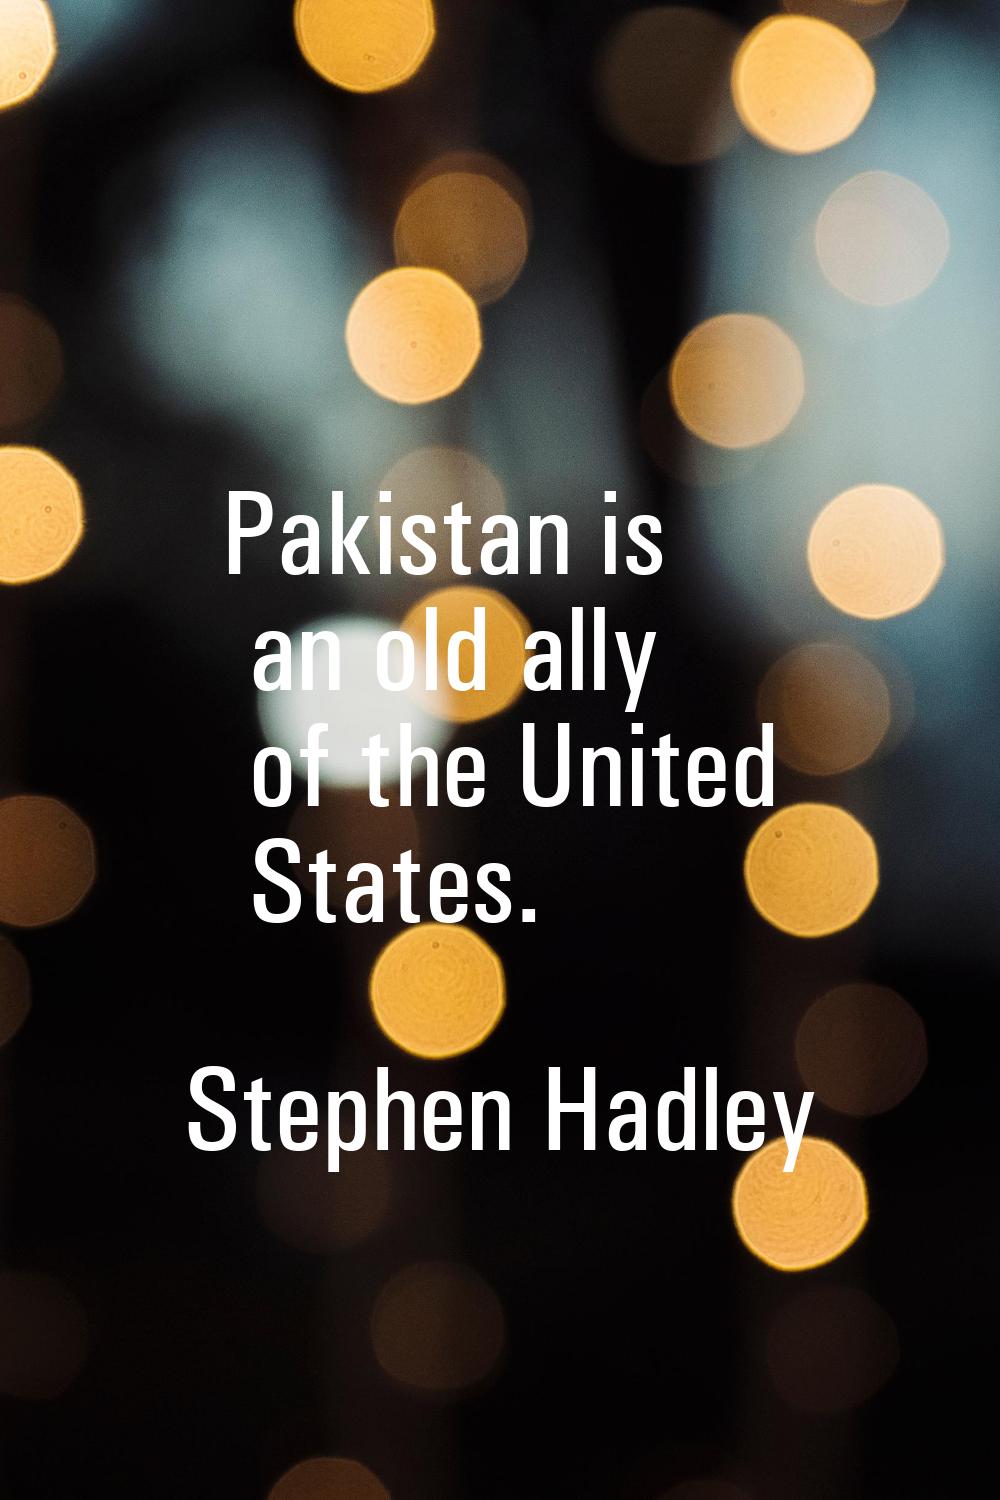 Pakistan is an old ally of the United States.